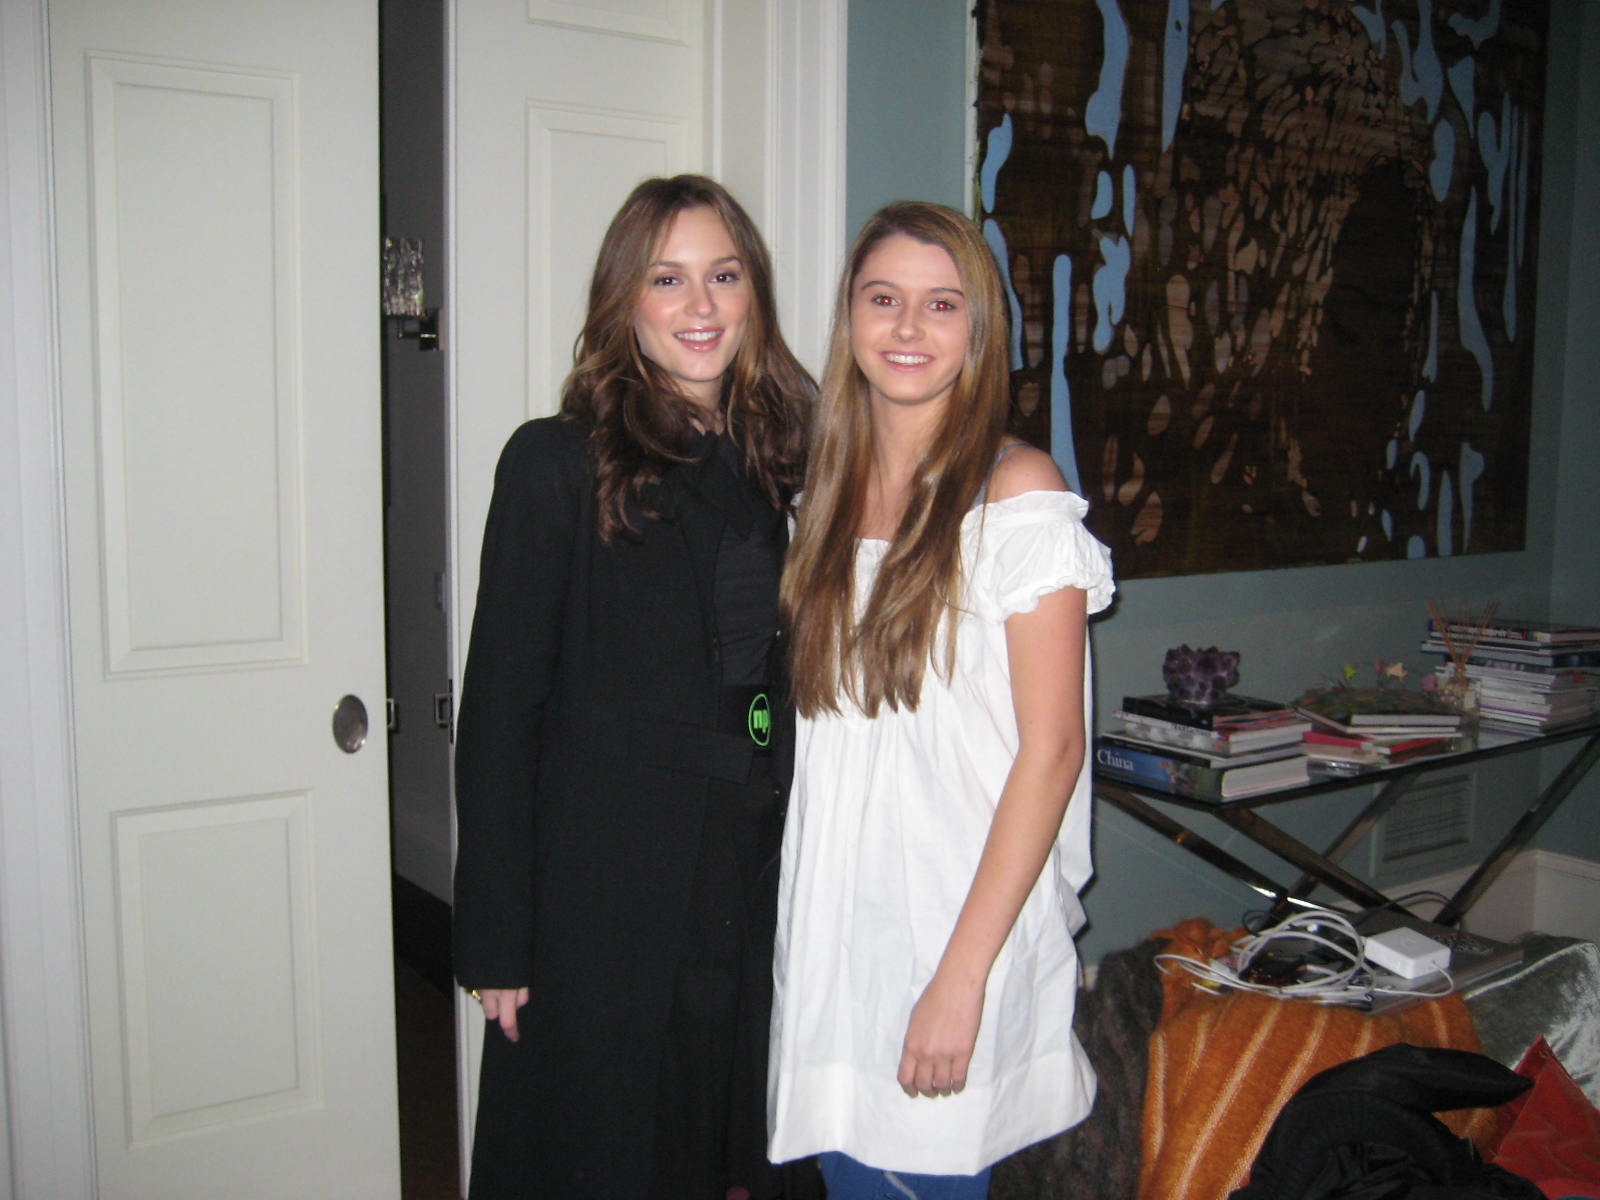 Courtney Baxter and Leighton Meester, NYC, Gossip Girl, January 2009